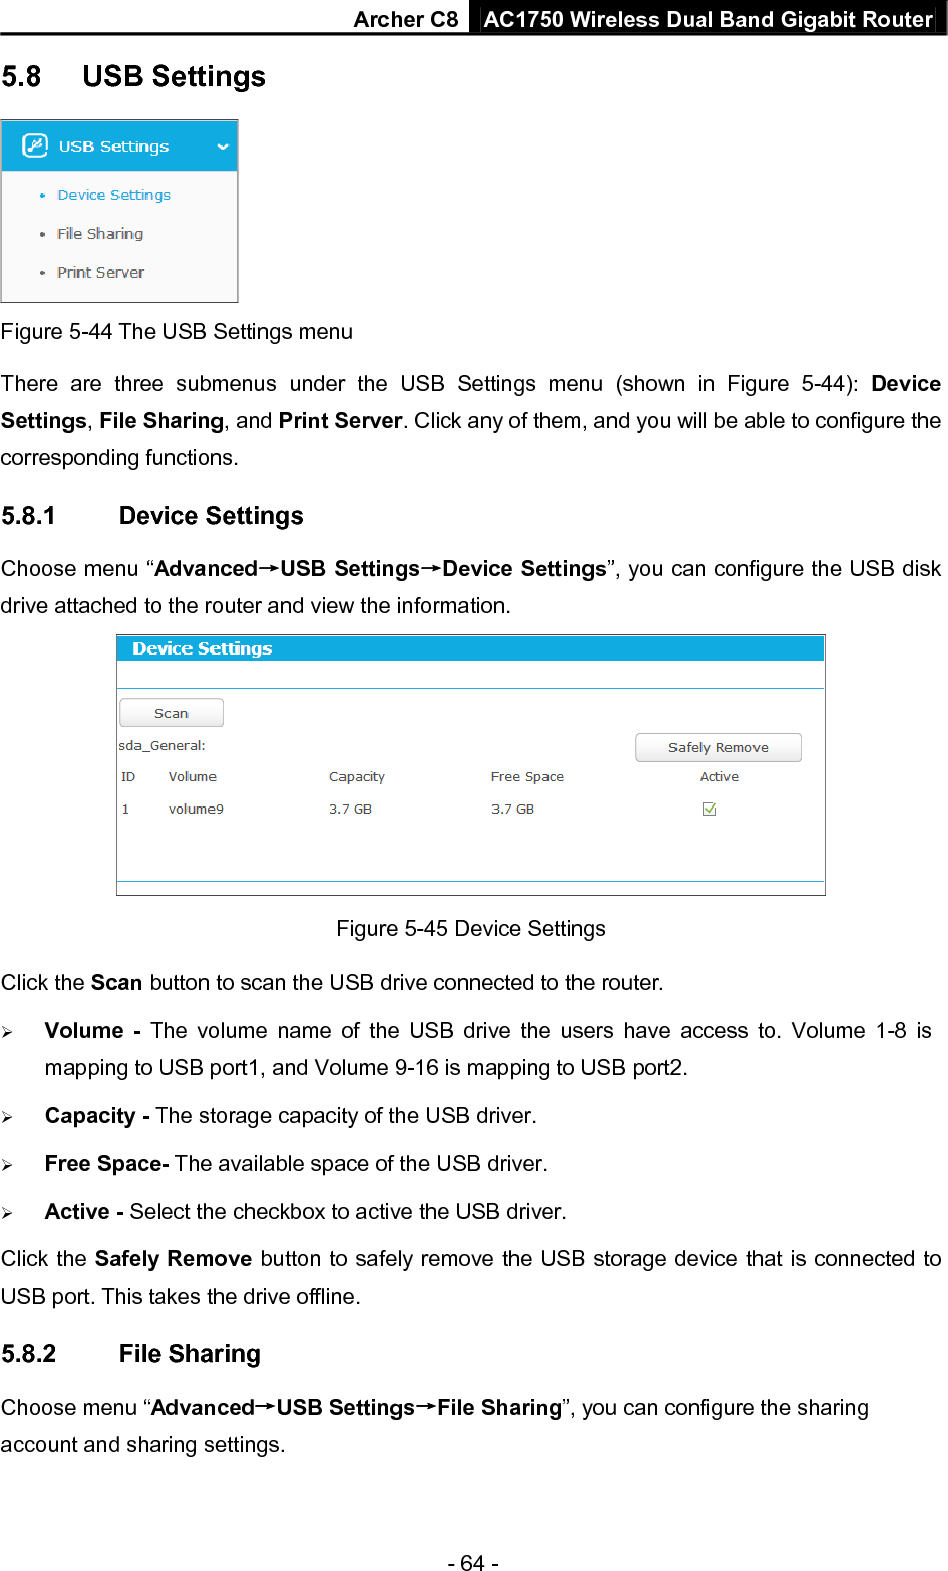 Archer C8 AC1750 Wireless Dual Band Gigabit Router  - 64 - 5.8 USB Settings  Figure 5-44 The USB Settings menu There are three submenus under the USB Settings menu (shown in Figure  5-44):  Device Settings, File Sharing, and Print Server. Click any of them, and you will be able to configure the corresponding functions. 5.8.1 Device Settings Choose menu “Advanced→USB Settings→Device Settings”, you can configure the USB disk drive attached to the router and view the information.  Figure 5-45 Device Settings Click the Scan button to scan the USB drive connected to the router.    Volume  -  The volume name of the USB drive the users have access to. Volume 1-8 is mapping to USB port1, and Volume 9-16 is mapping to USB port2.  Capacity - The storage capacity of the USB driver.    Free Space- The available space of the USB driver.    Active - Select the checkbox to active the USB driver. Click the Safely Remove button to safely remove the USB storage device that is connected to USB port. This takes the drive offline. 5.8.2 File Sharing Choose menu “Advanced→USB Settings→File Sharing”, you can configure the sharing account and sharing settings. 